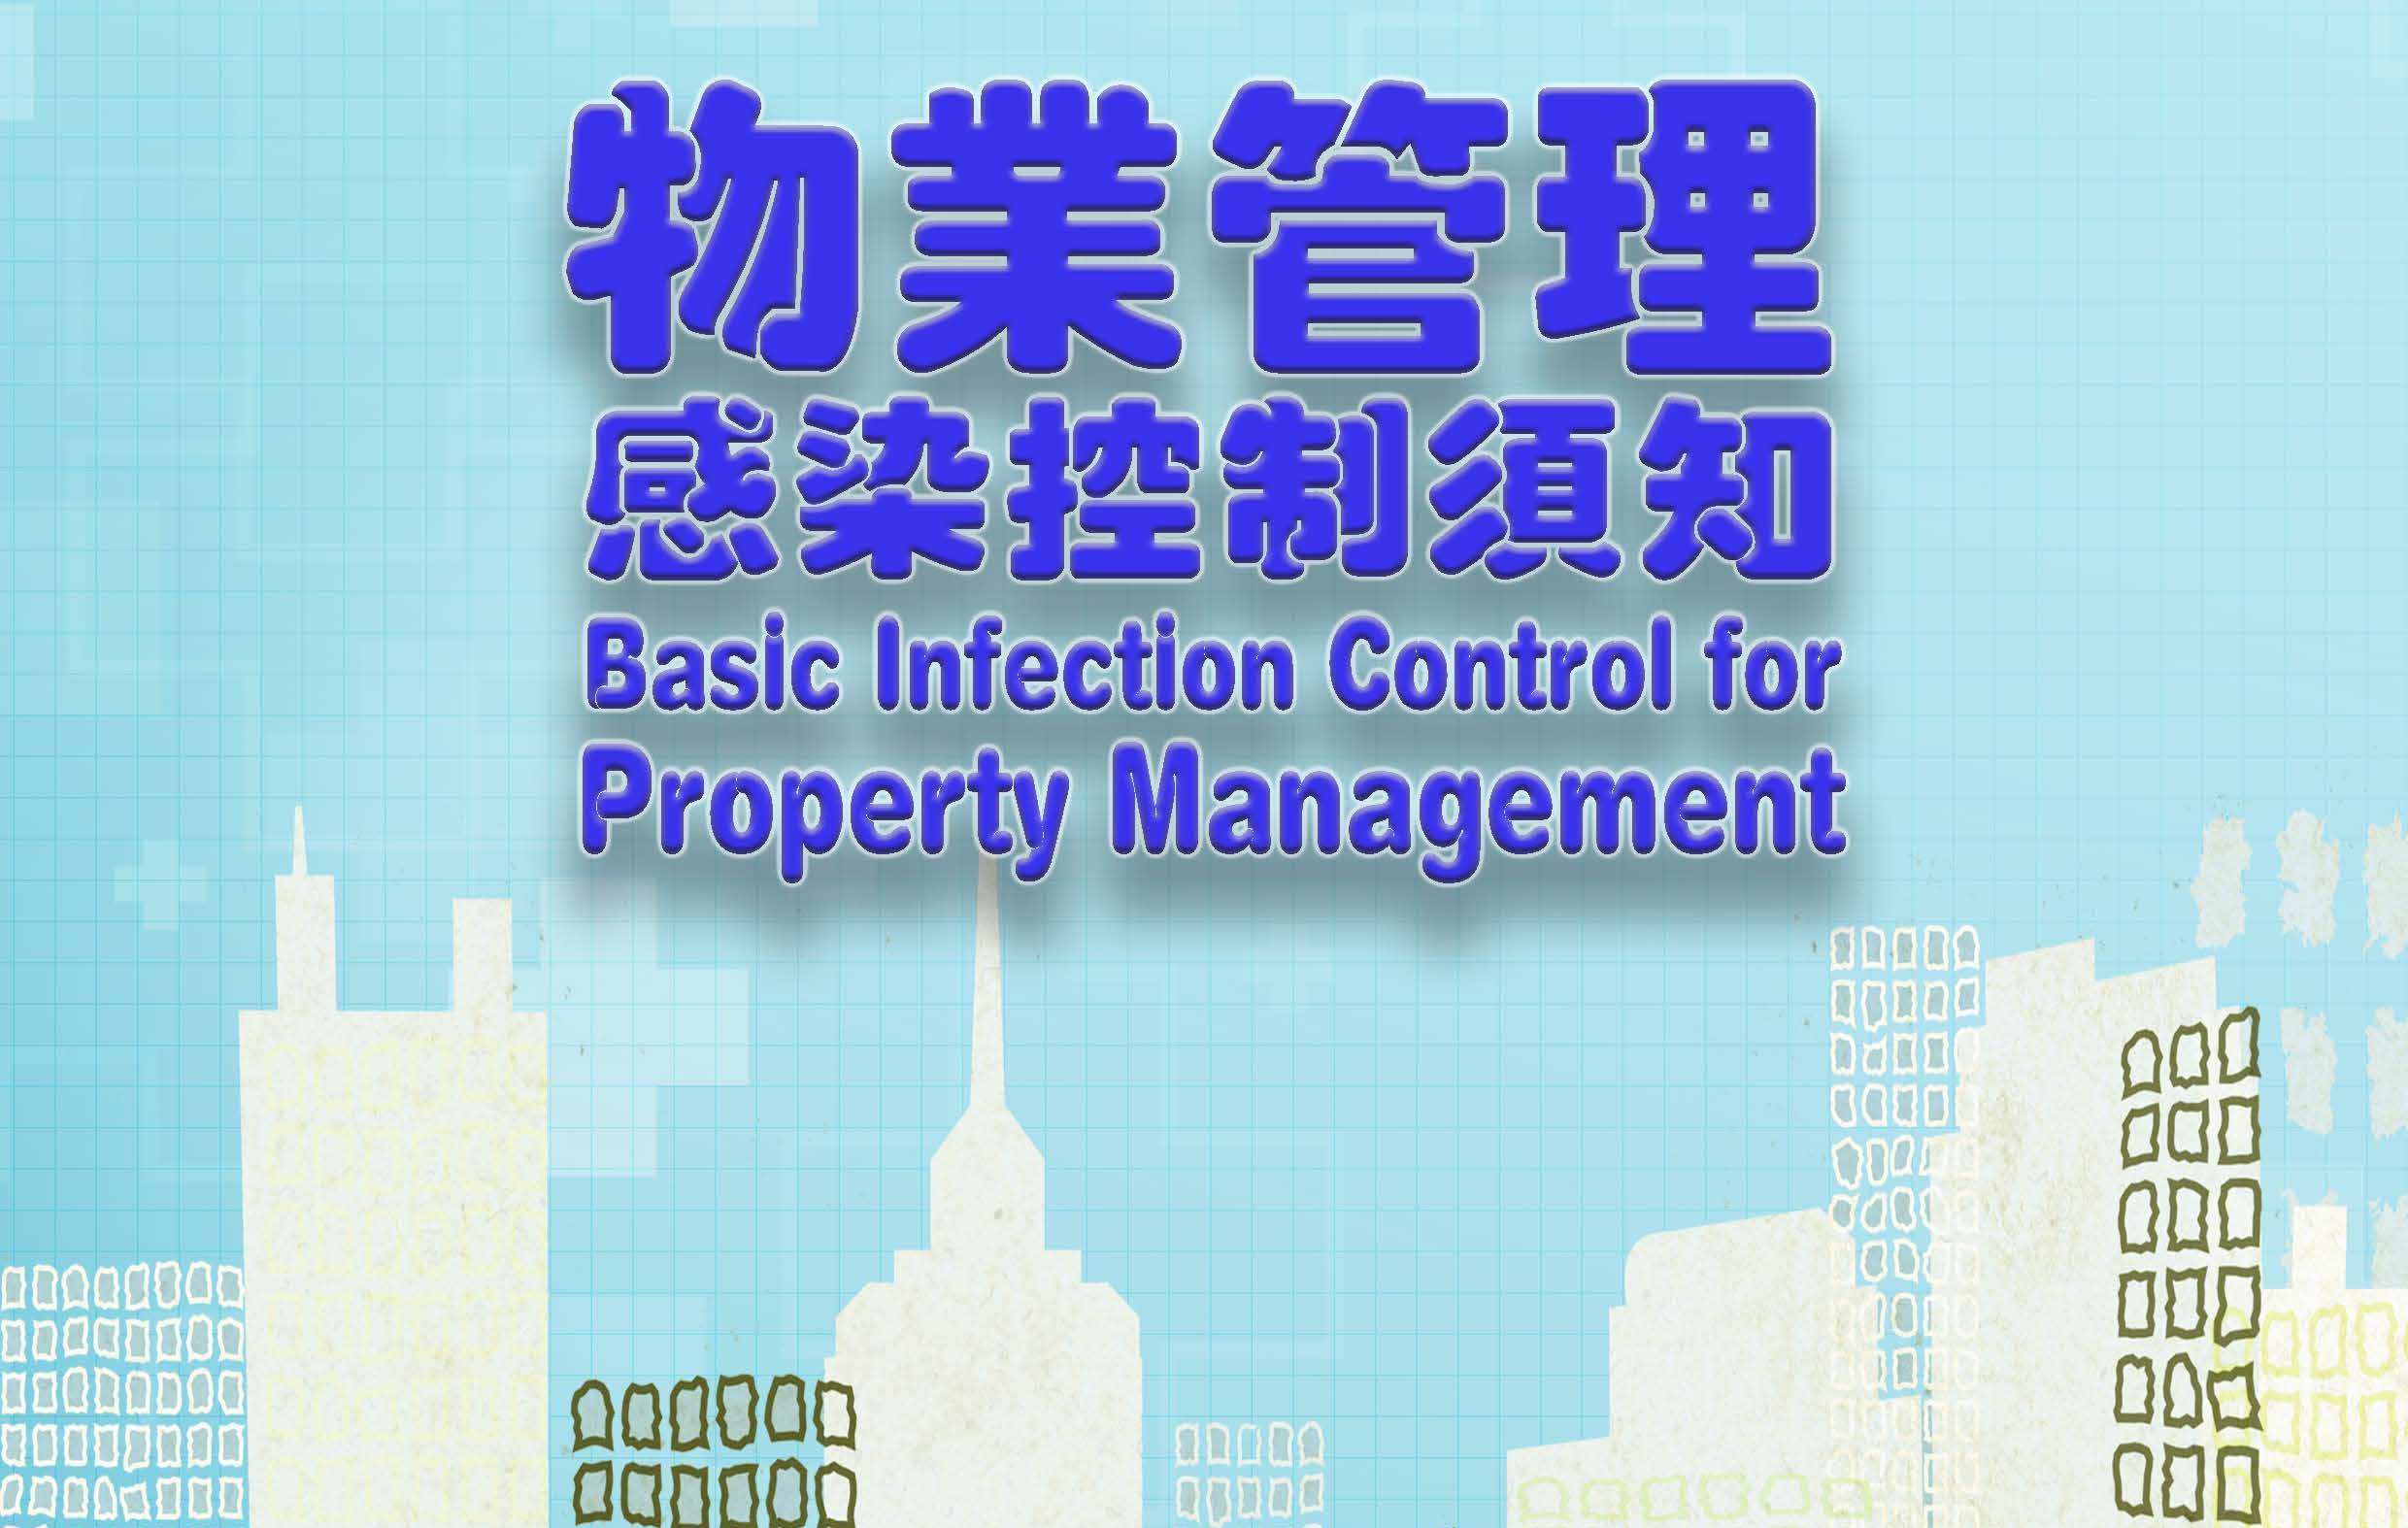 Basic Infection Control for Property Management